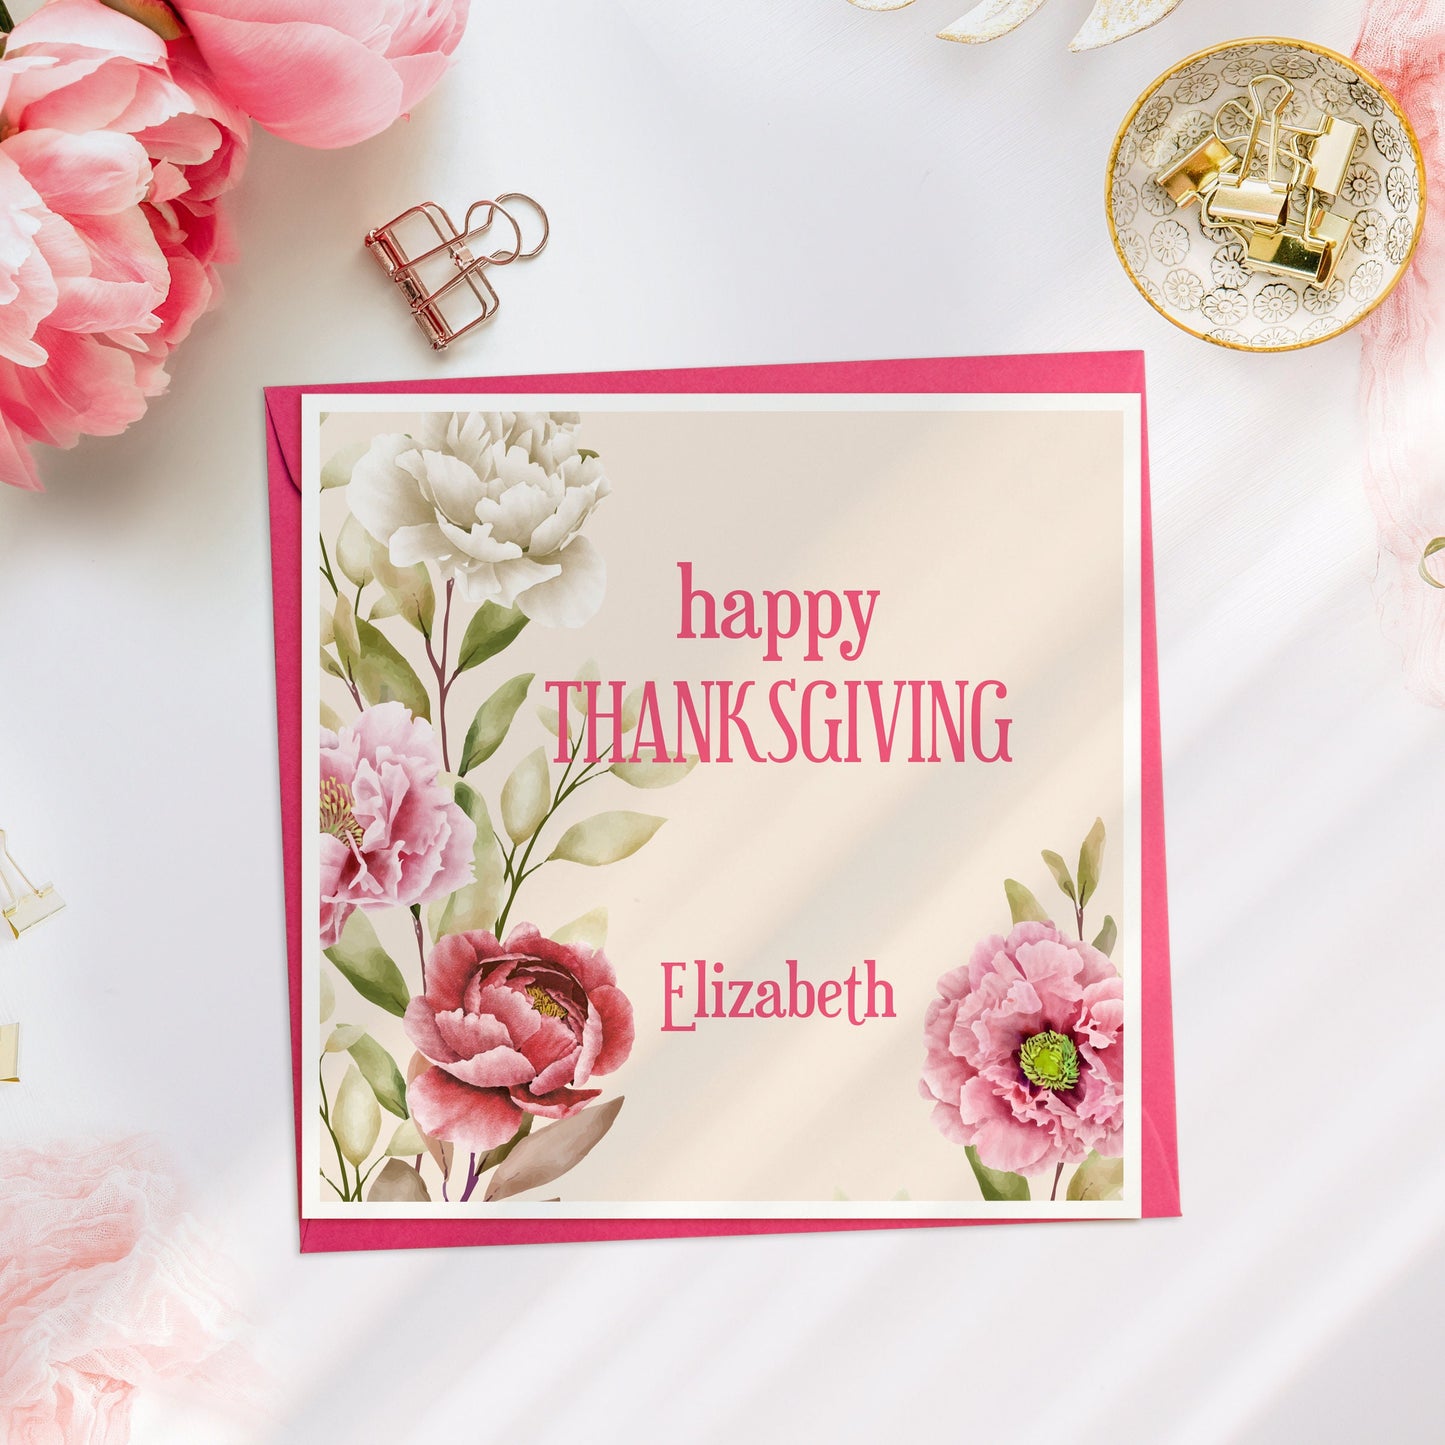 Floral Thanksgiving Card, Happy Thanksgiving Card, Thanks Giving Card, Thanksgiving cards 2022, Greetings for Thanksgiving, Thank you!